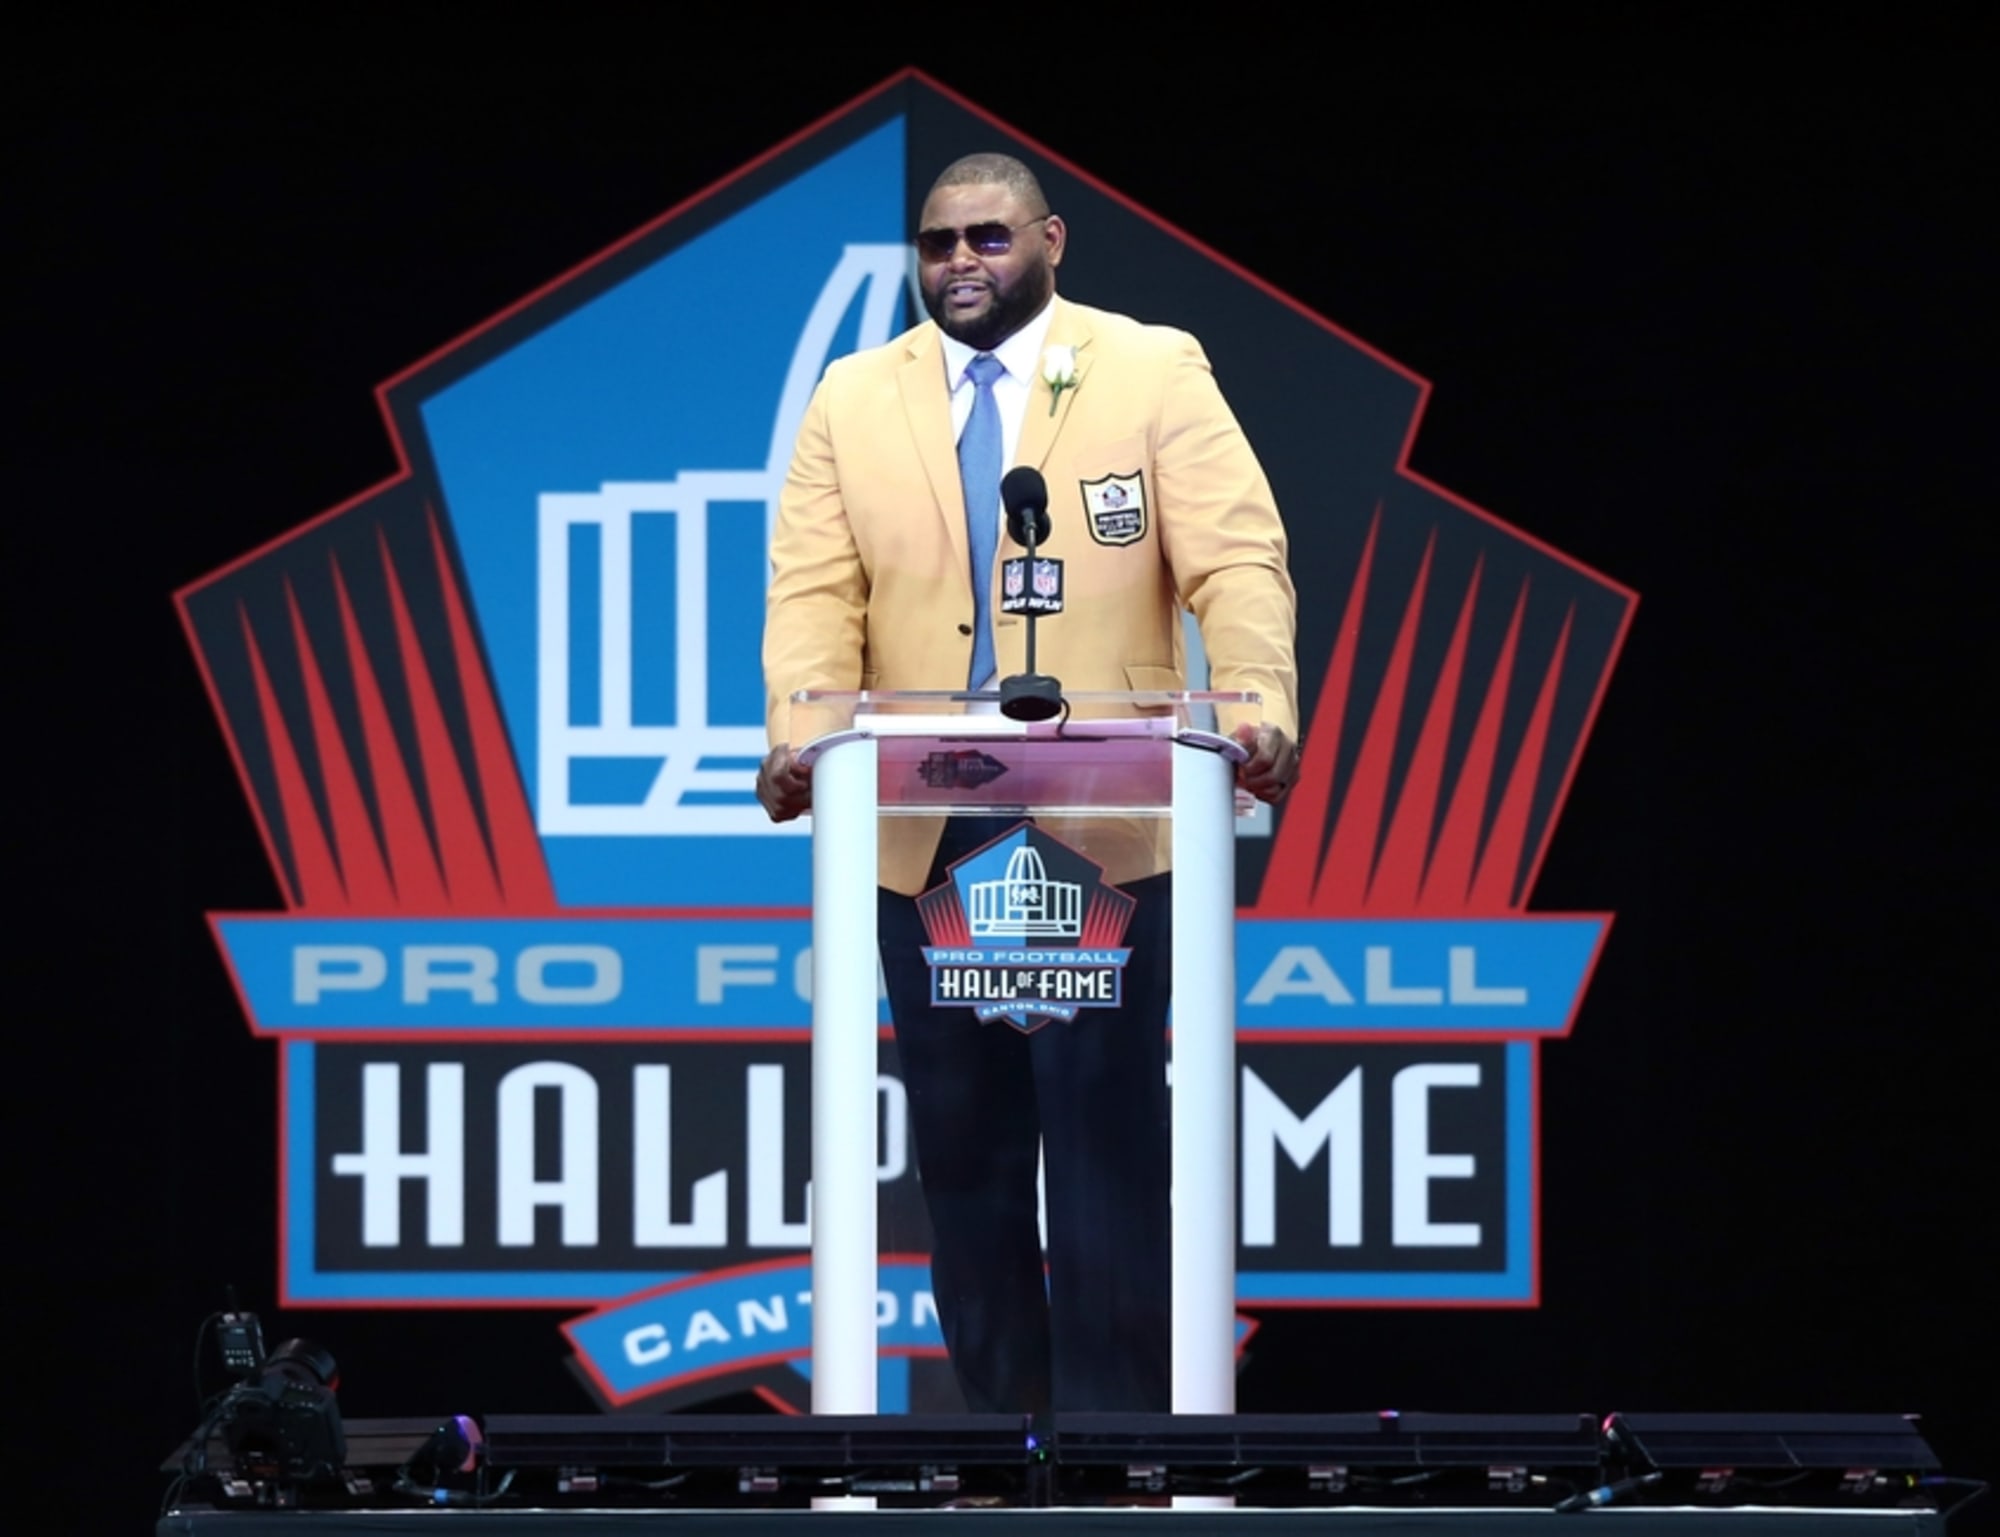 Orlando Pace Hall of Fame Speech is Truely Remarkable